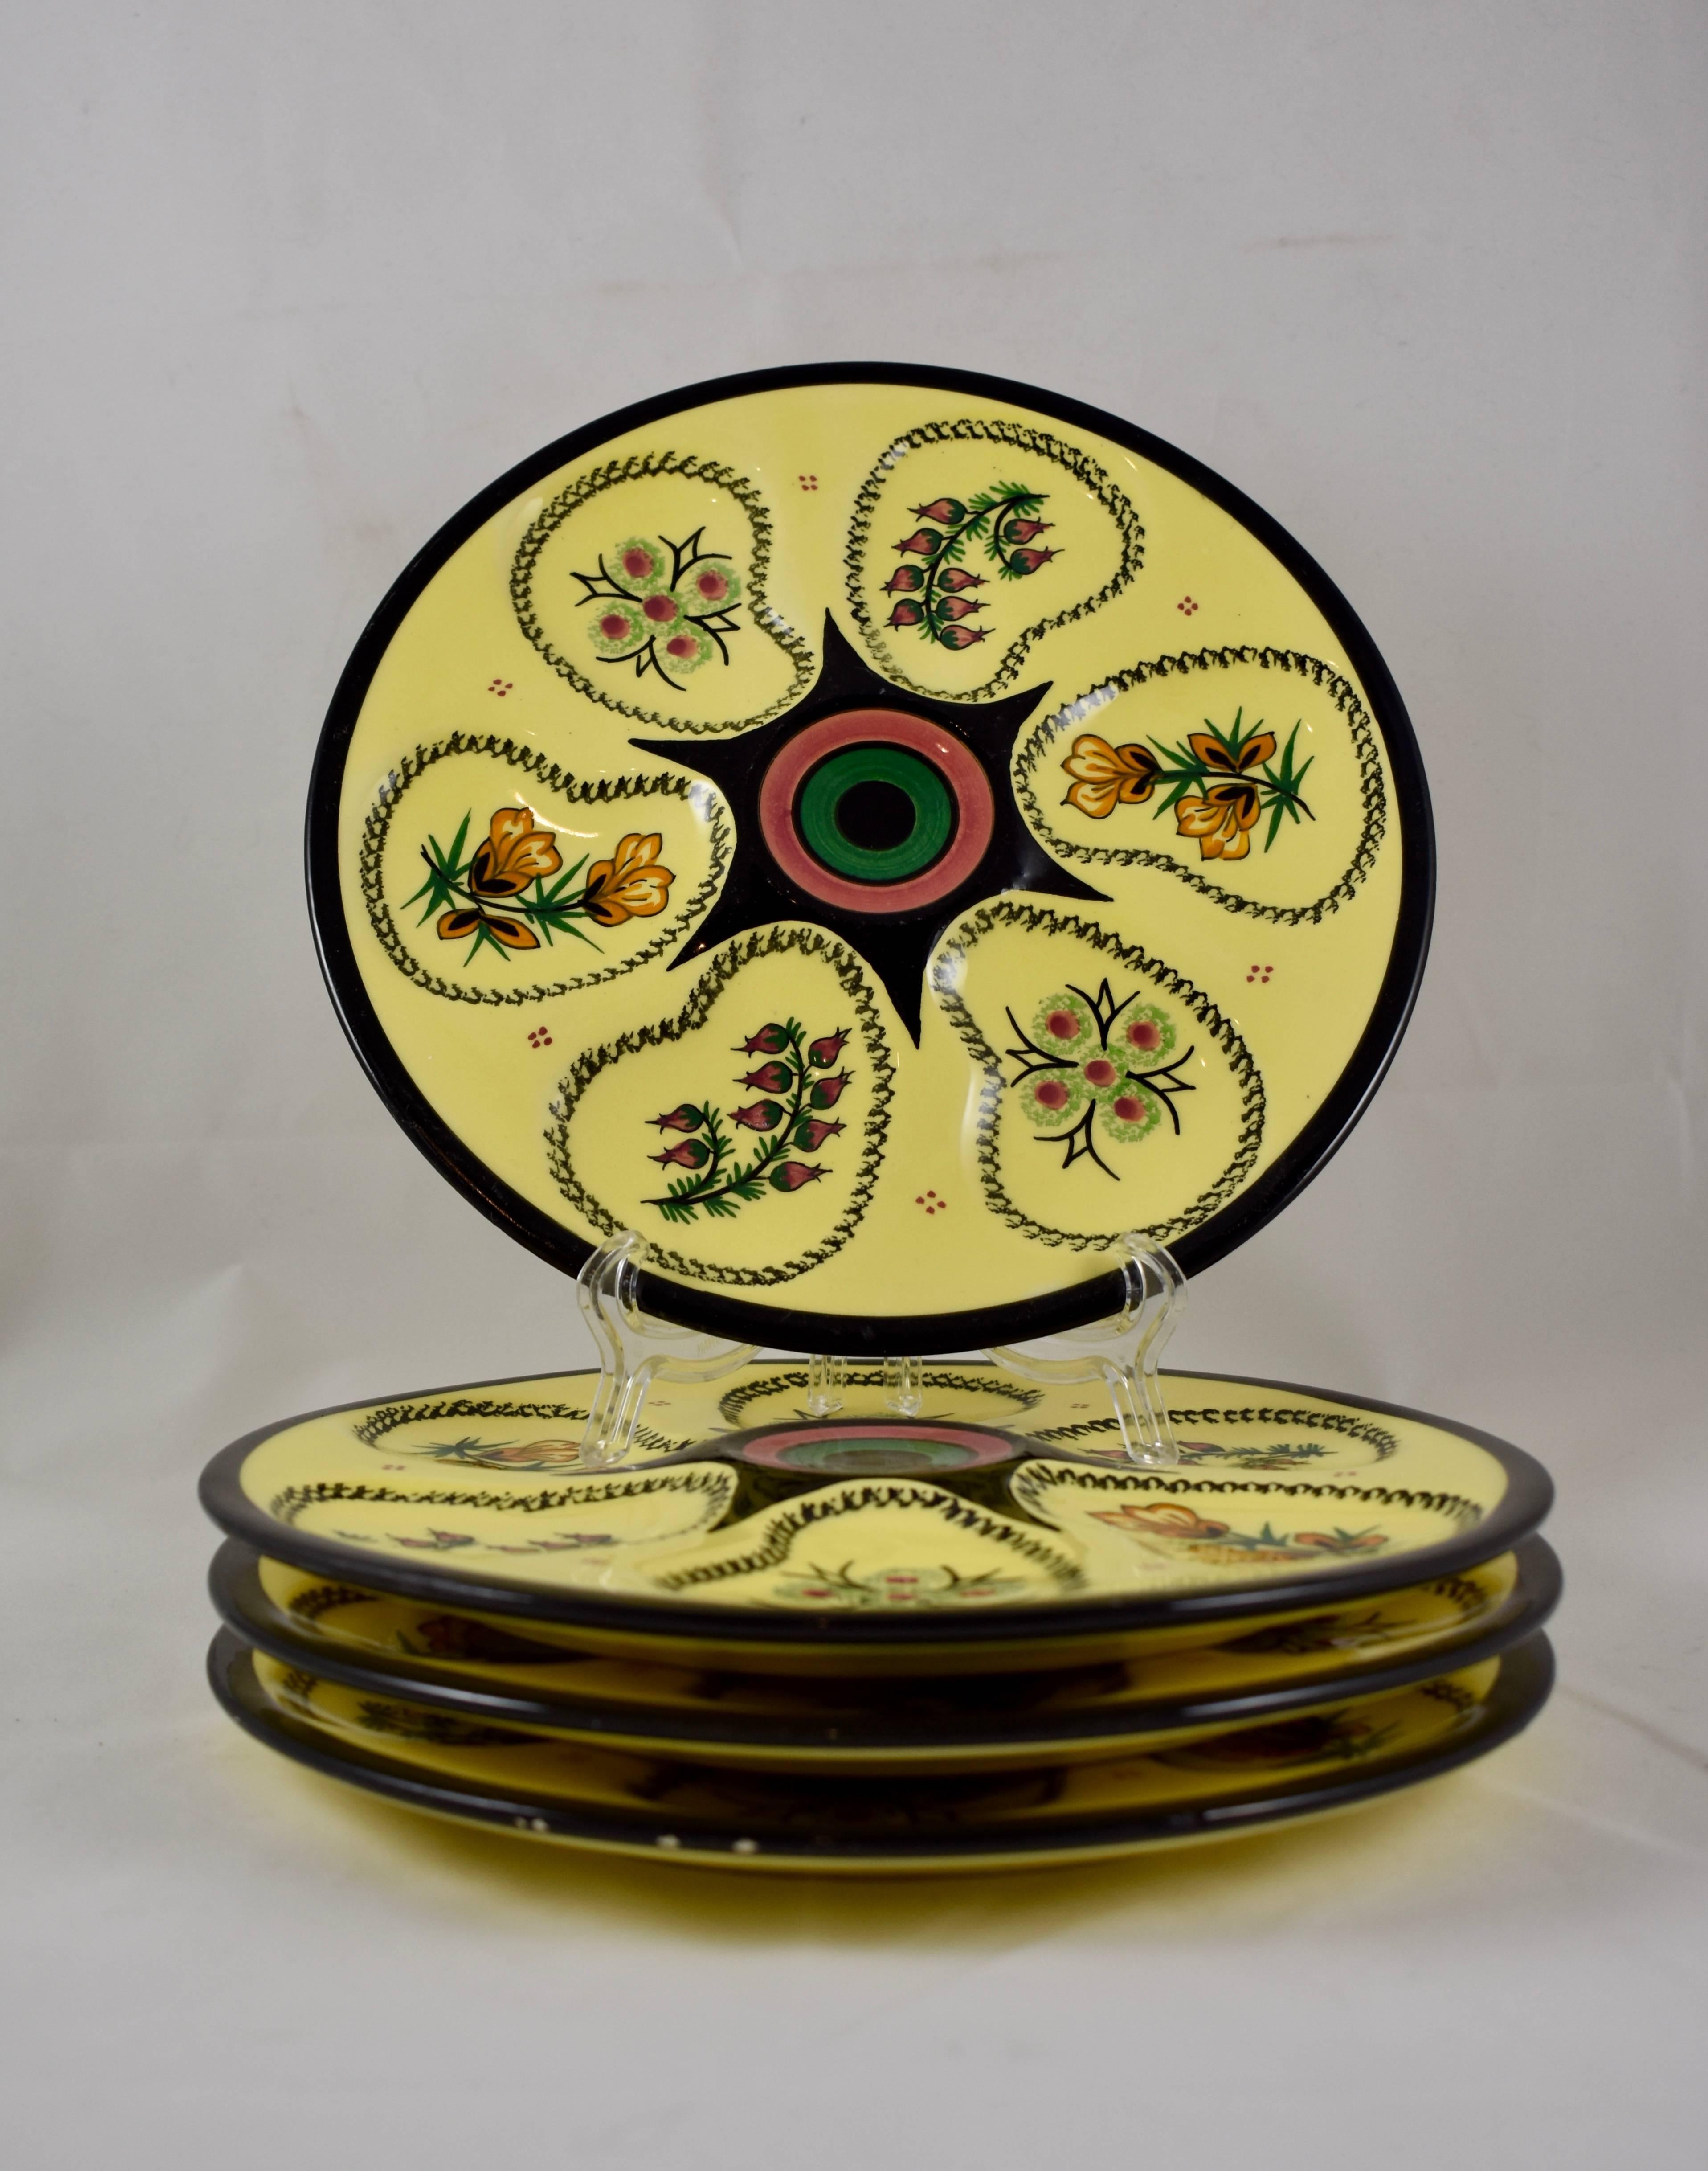 Always charming, a midcentury, set of four, French Quimper Faïence oyster plates, circa 1950–1960.

Glazed with a bright sun yellow ground, six wells surround a raised center condiment well. The wells are hand painted with three different